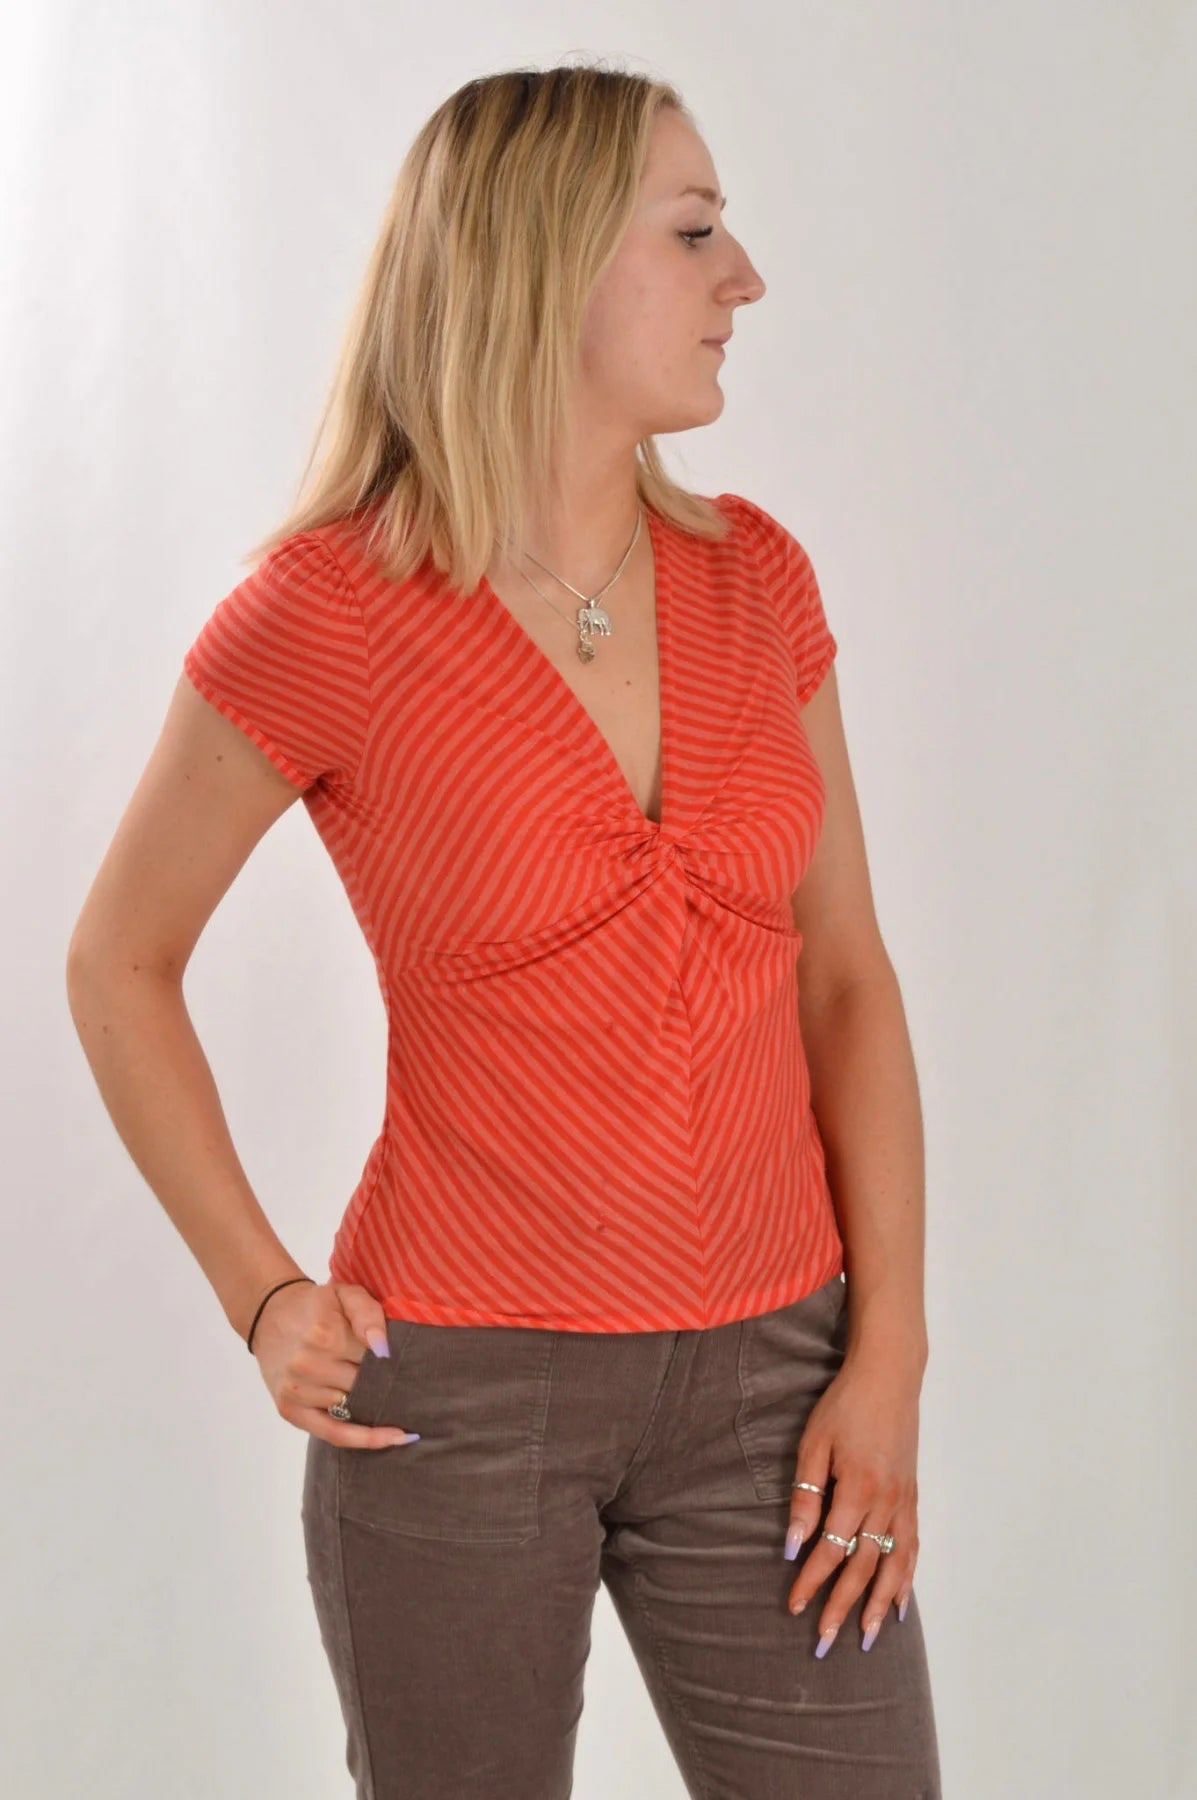 Phase Eight Striped Twist Front Top